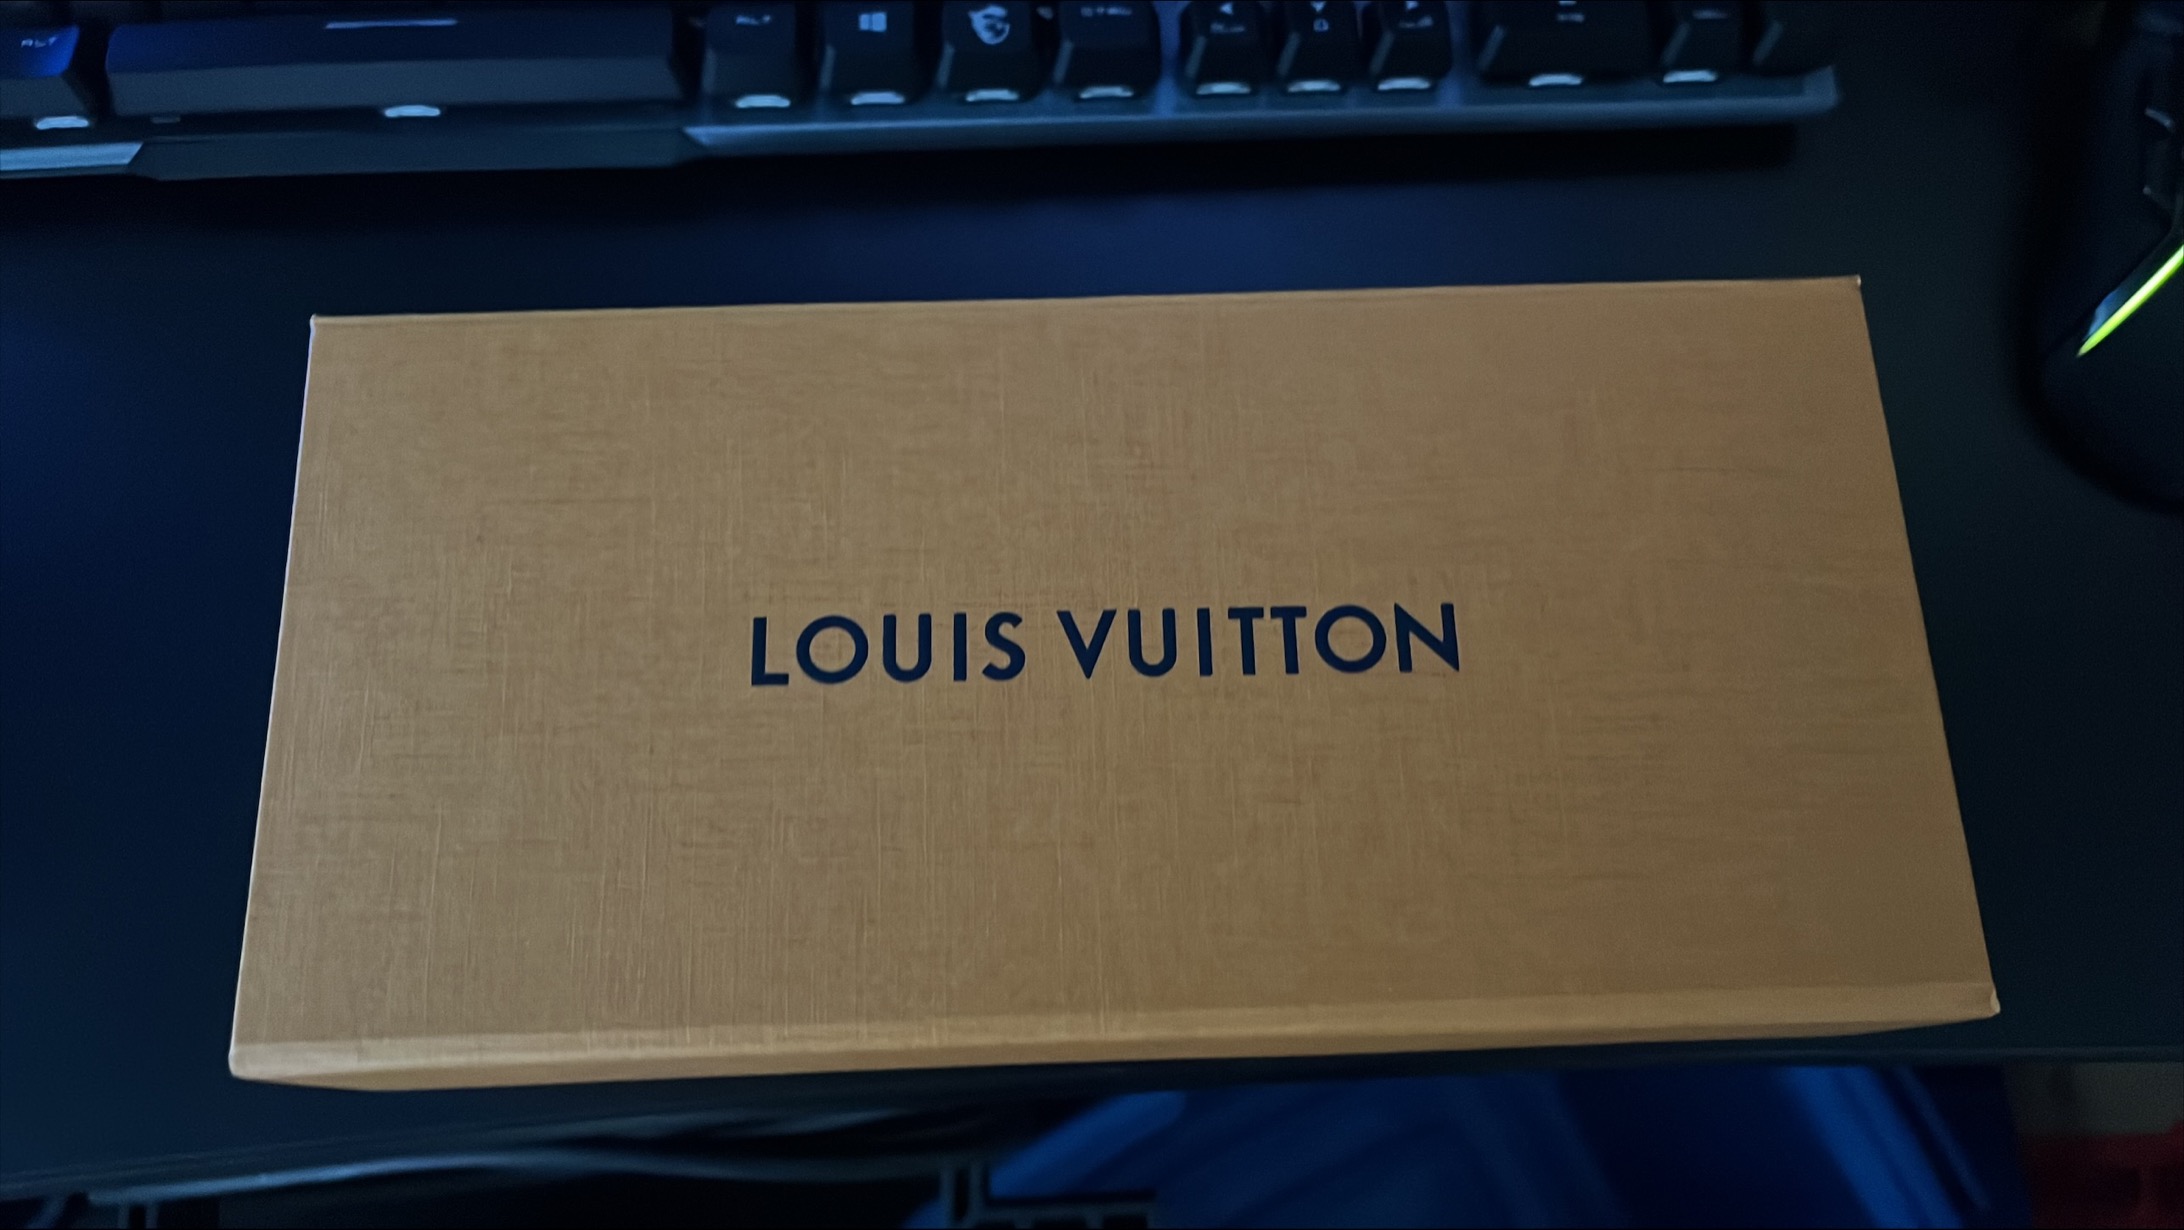 Linus Tech Tips on X: I bought louis vuitton headphones. now I only listen  to Money by Cardi B  / X